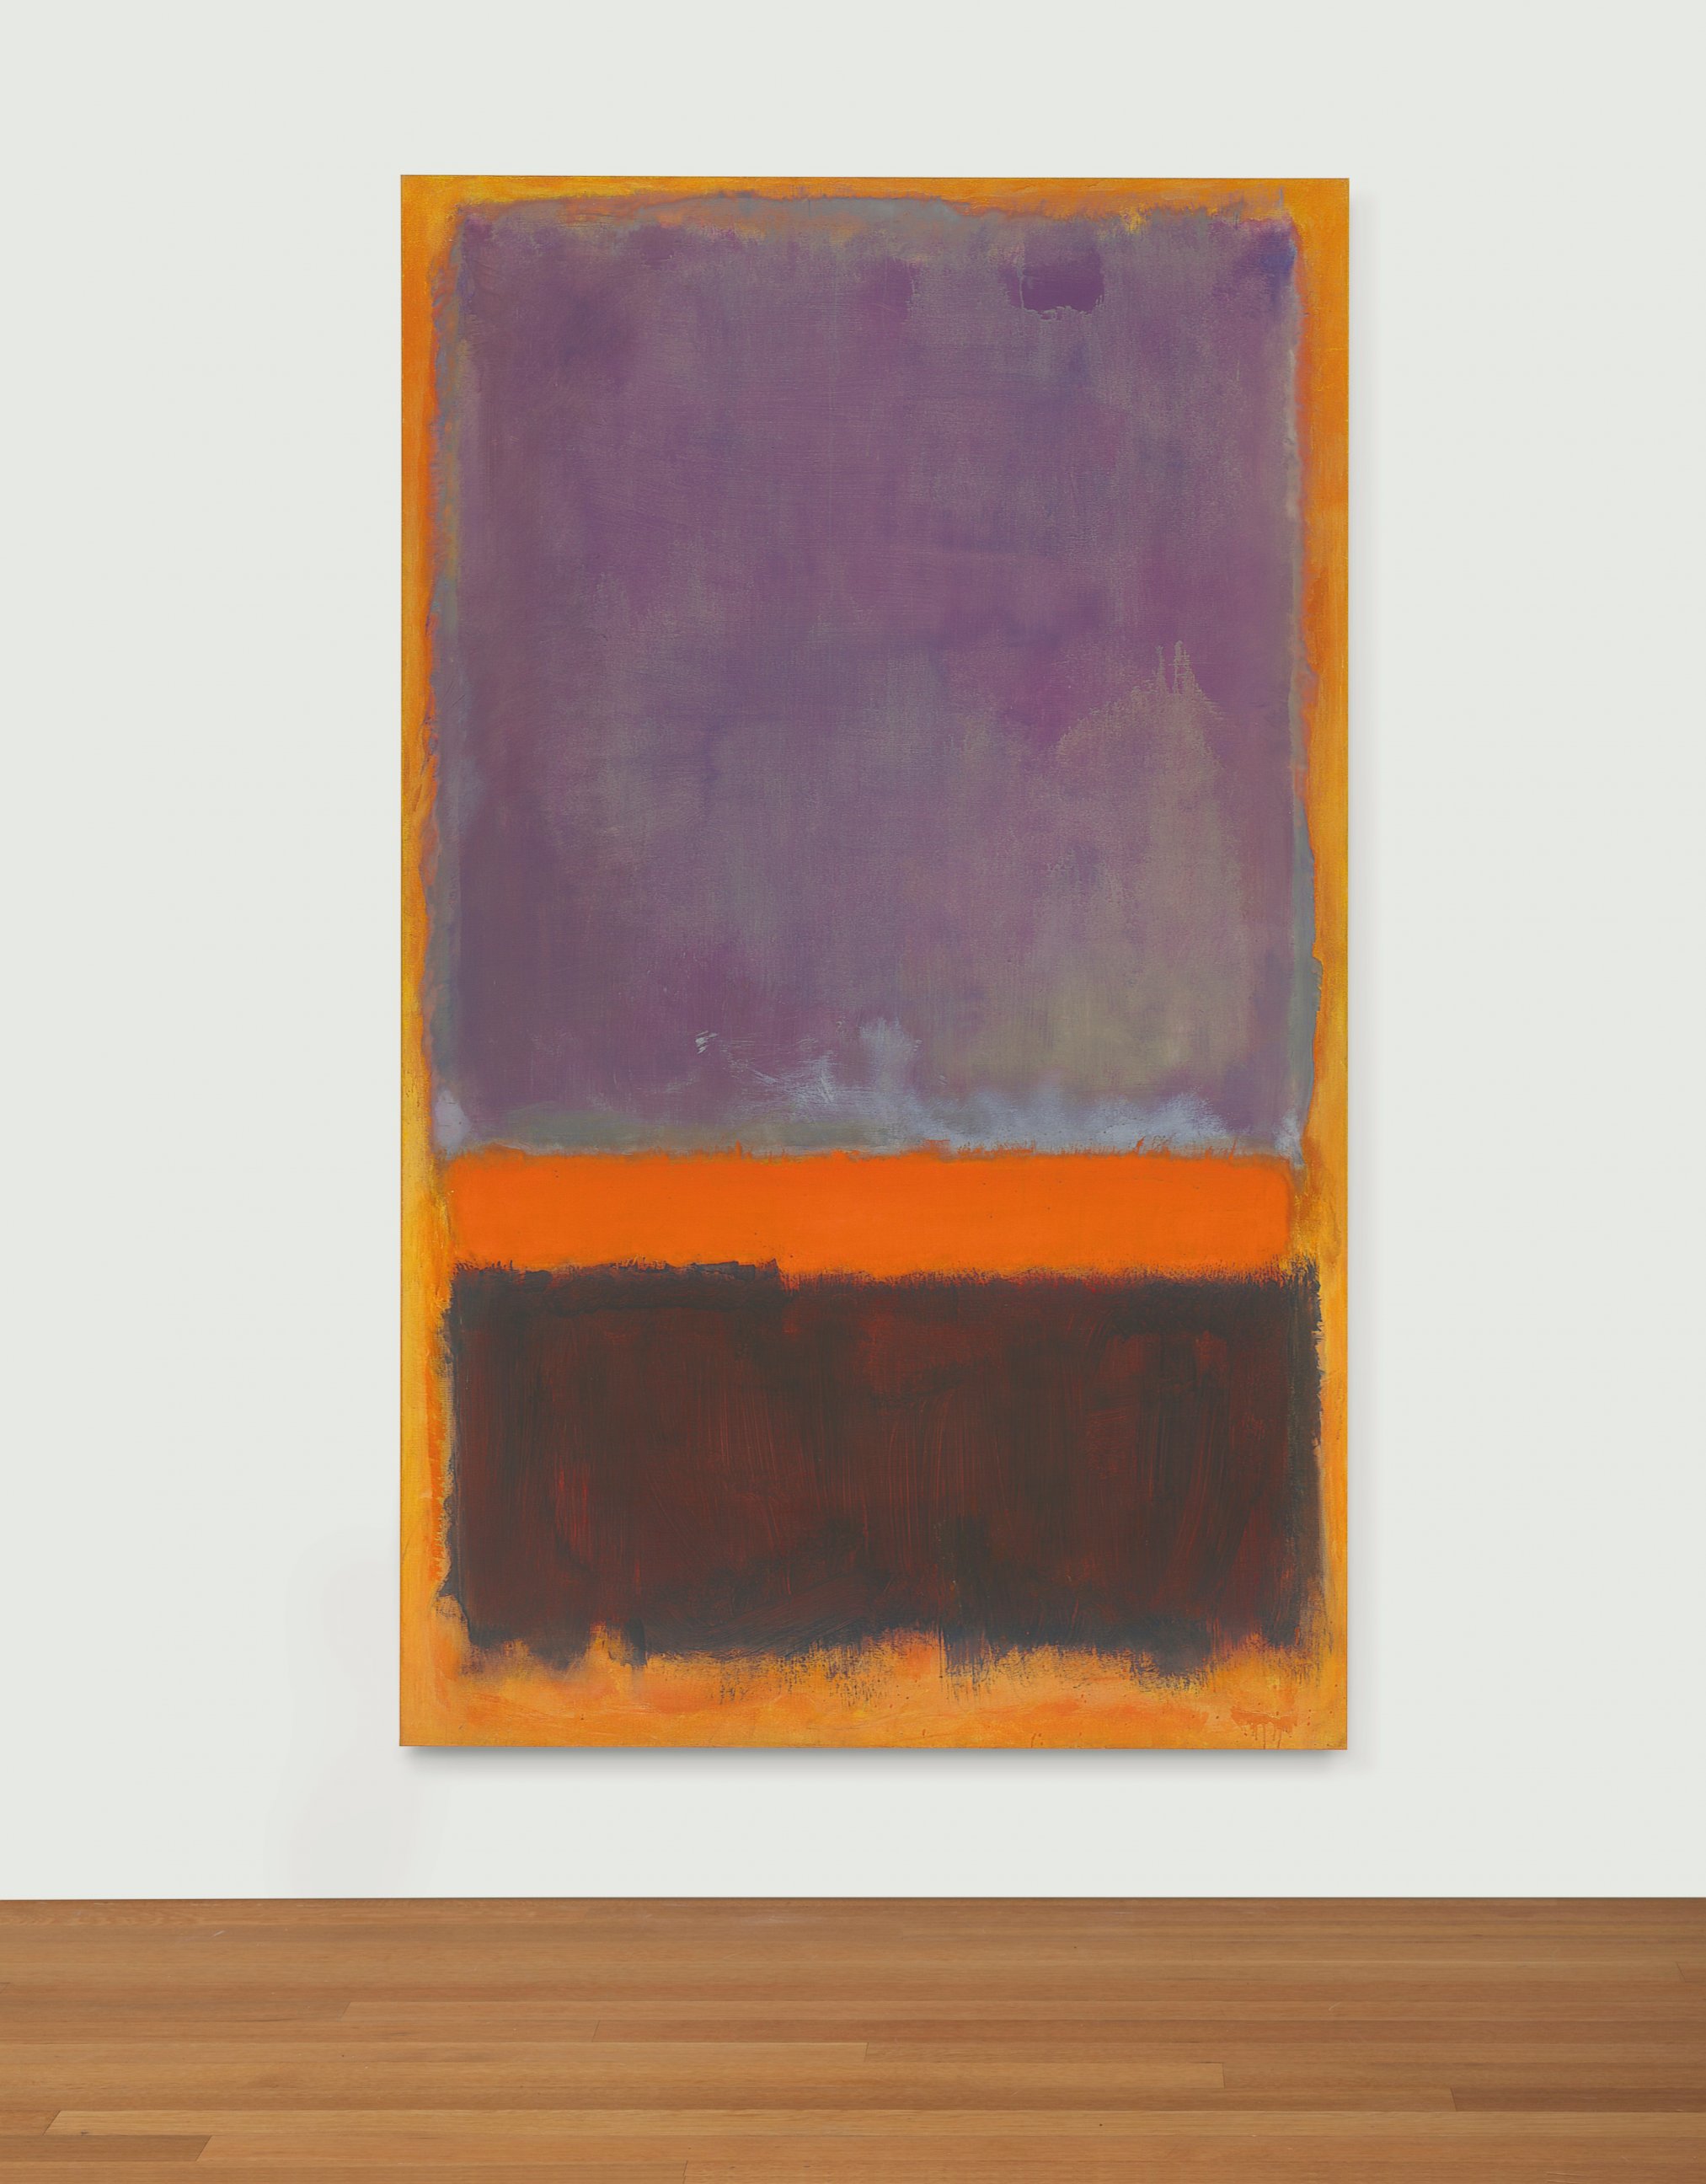 PHOTO: "Untitled" by Mark Rothko sold for $66,245,000.